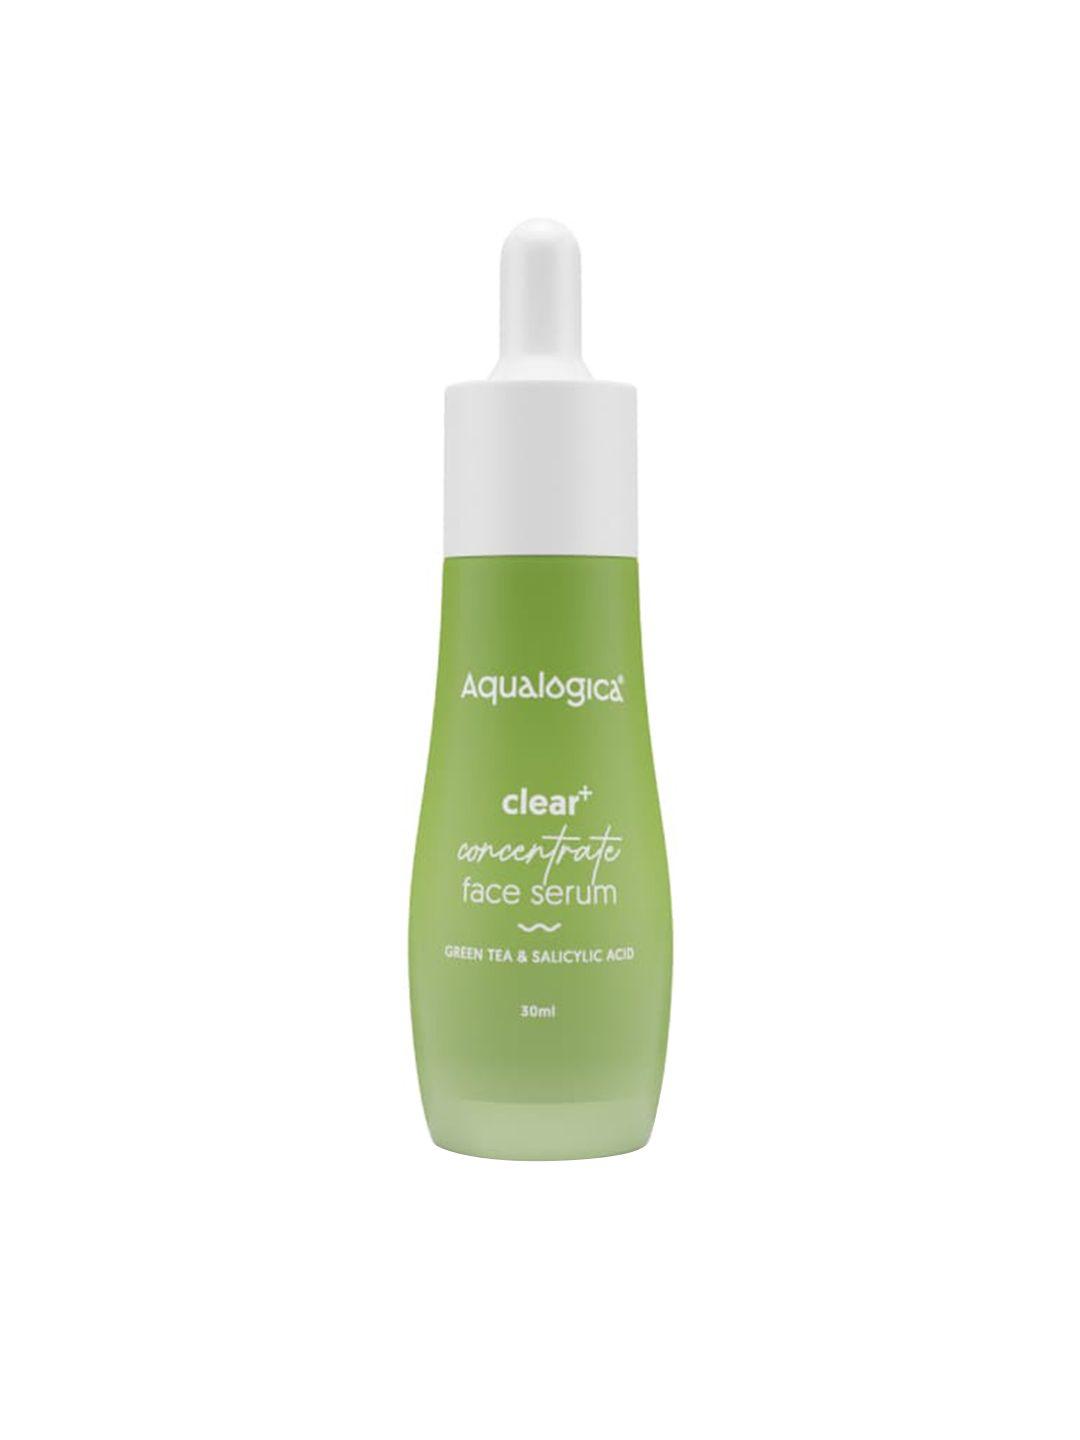 aqualogica clear+ concentrate face serum with green tea & salicylic acid 30 ml